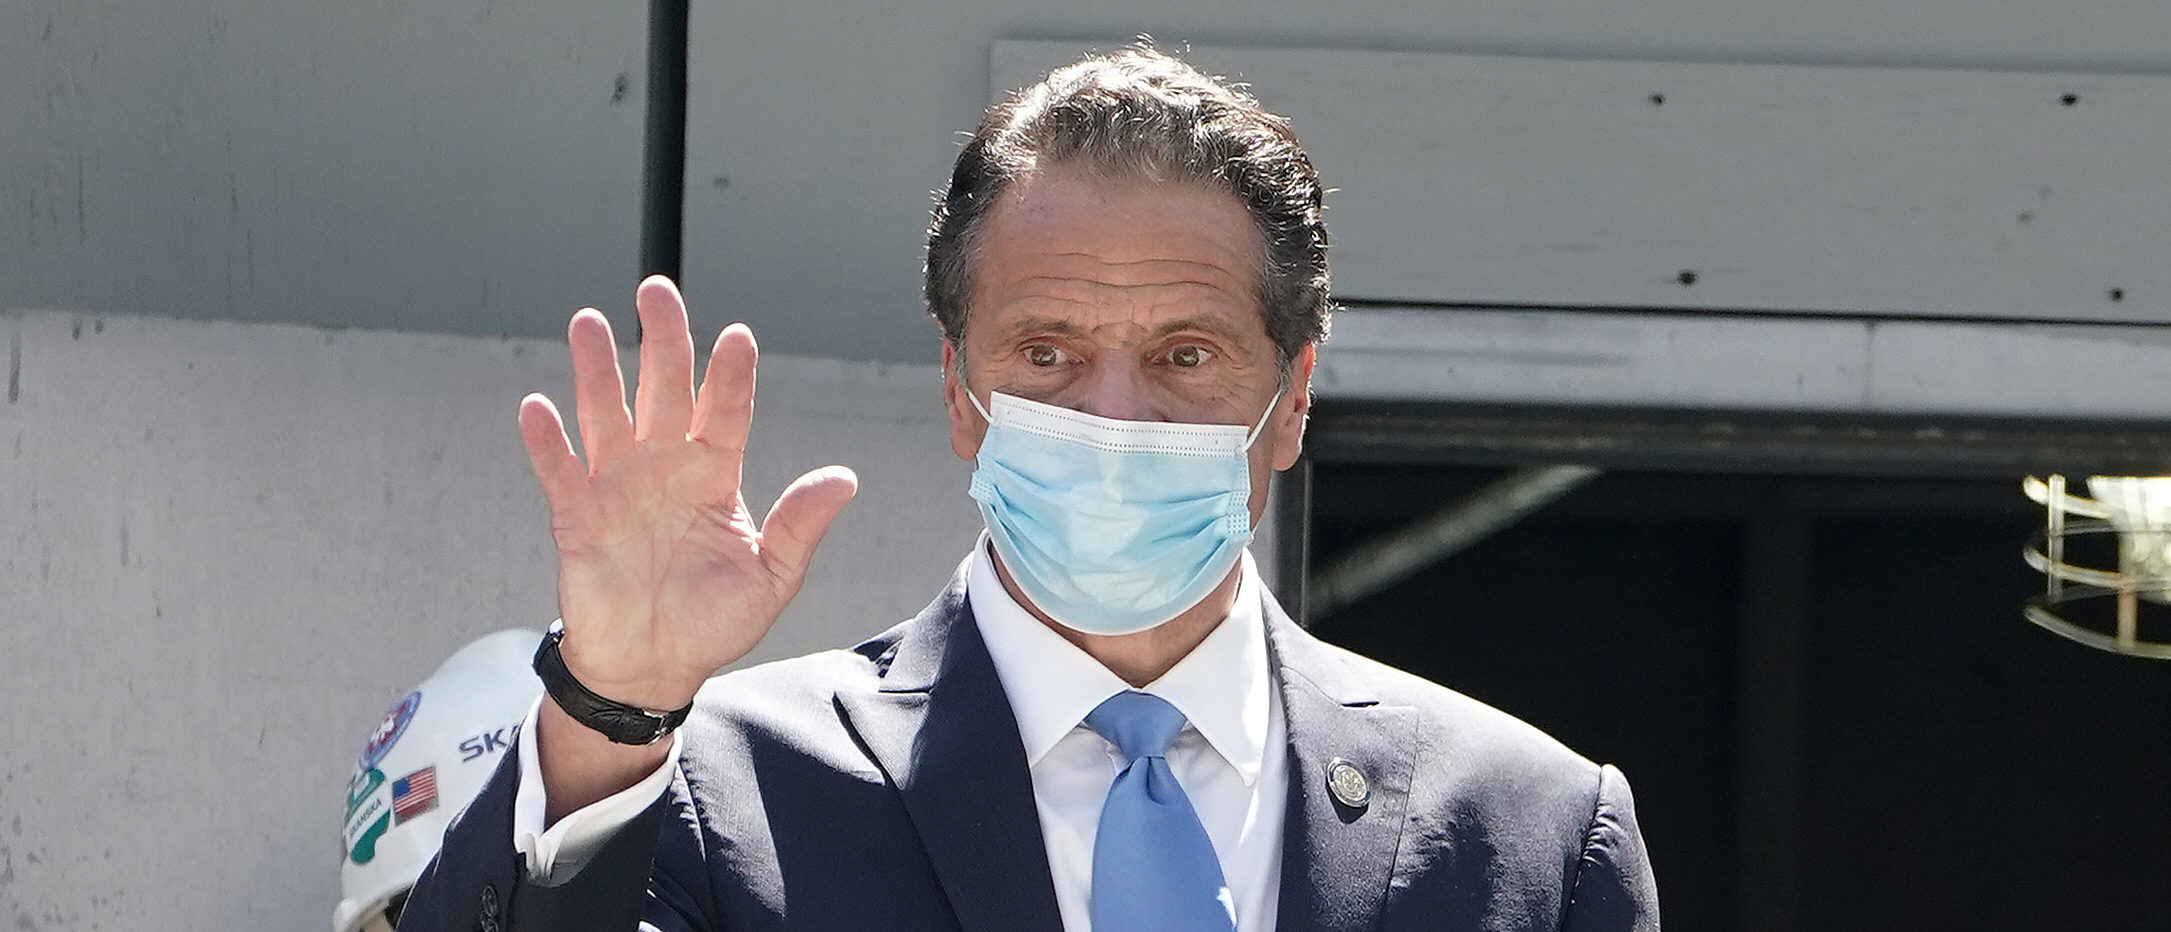 Cuomo Forms Task Force To Review Virus Vaccine, Saying He Does Not Trust The Feds